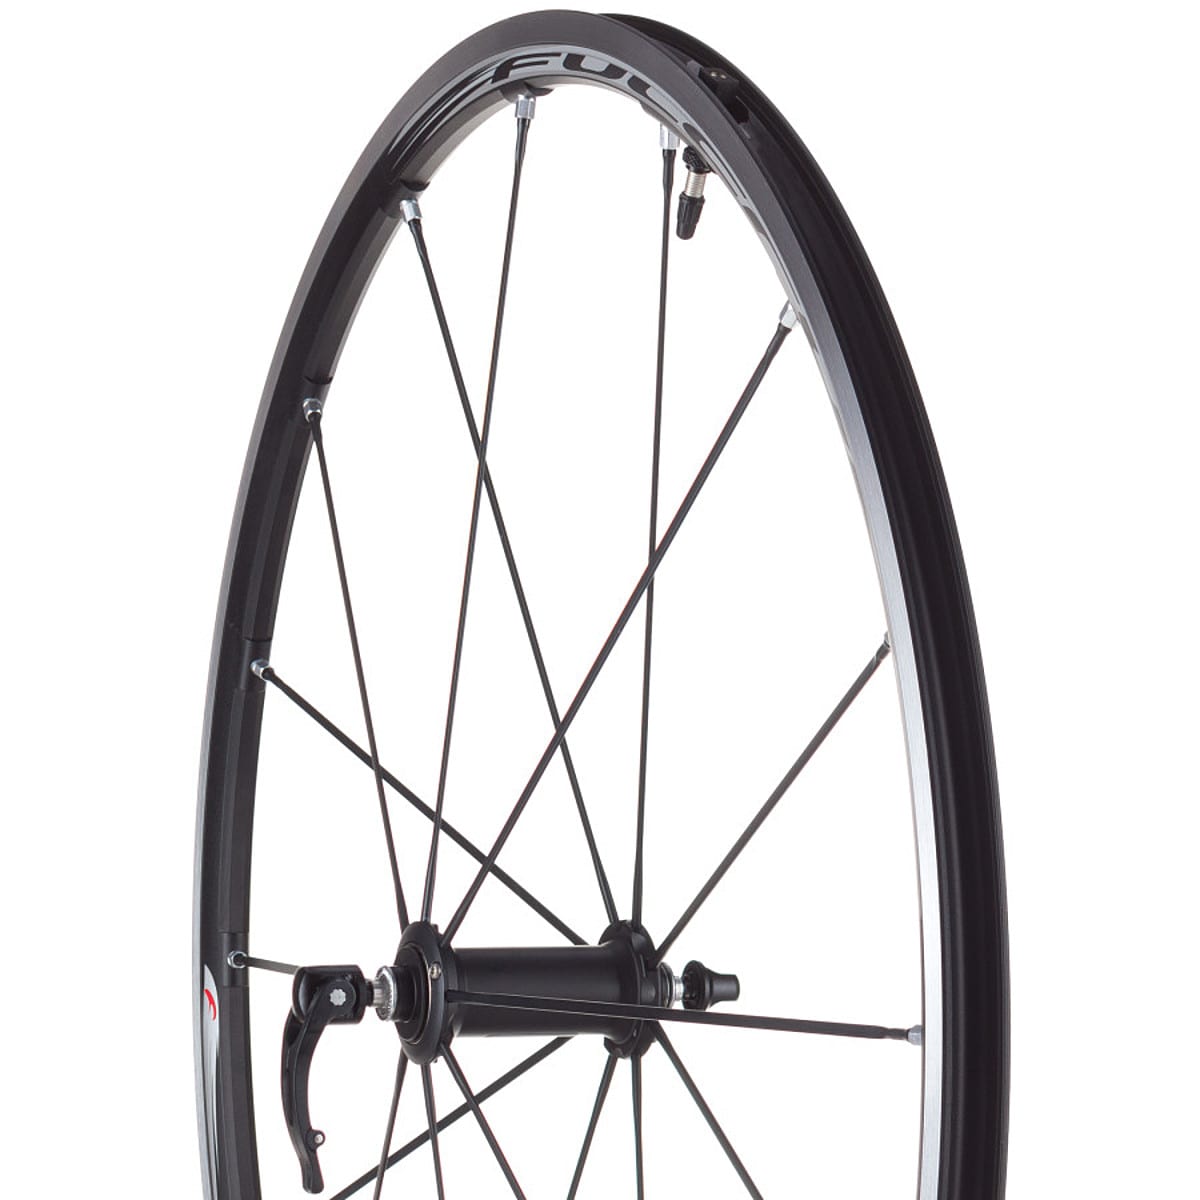 Fulcrum Racing 1 2-Way Fit Road Wheelset - Clincher - Components